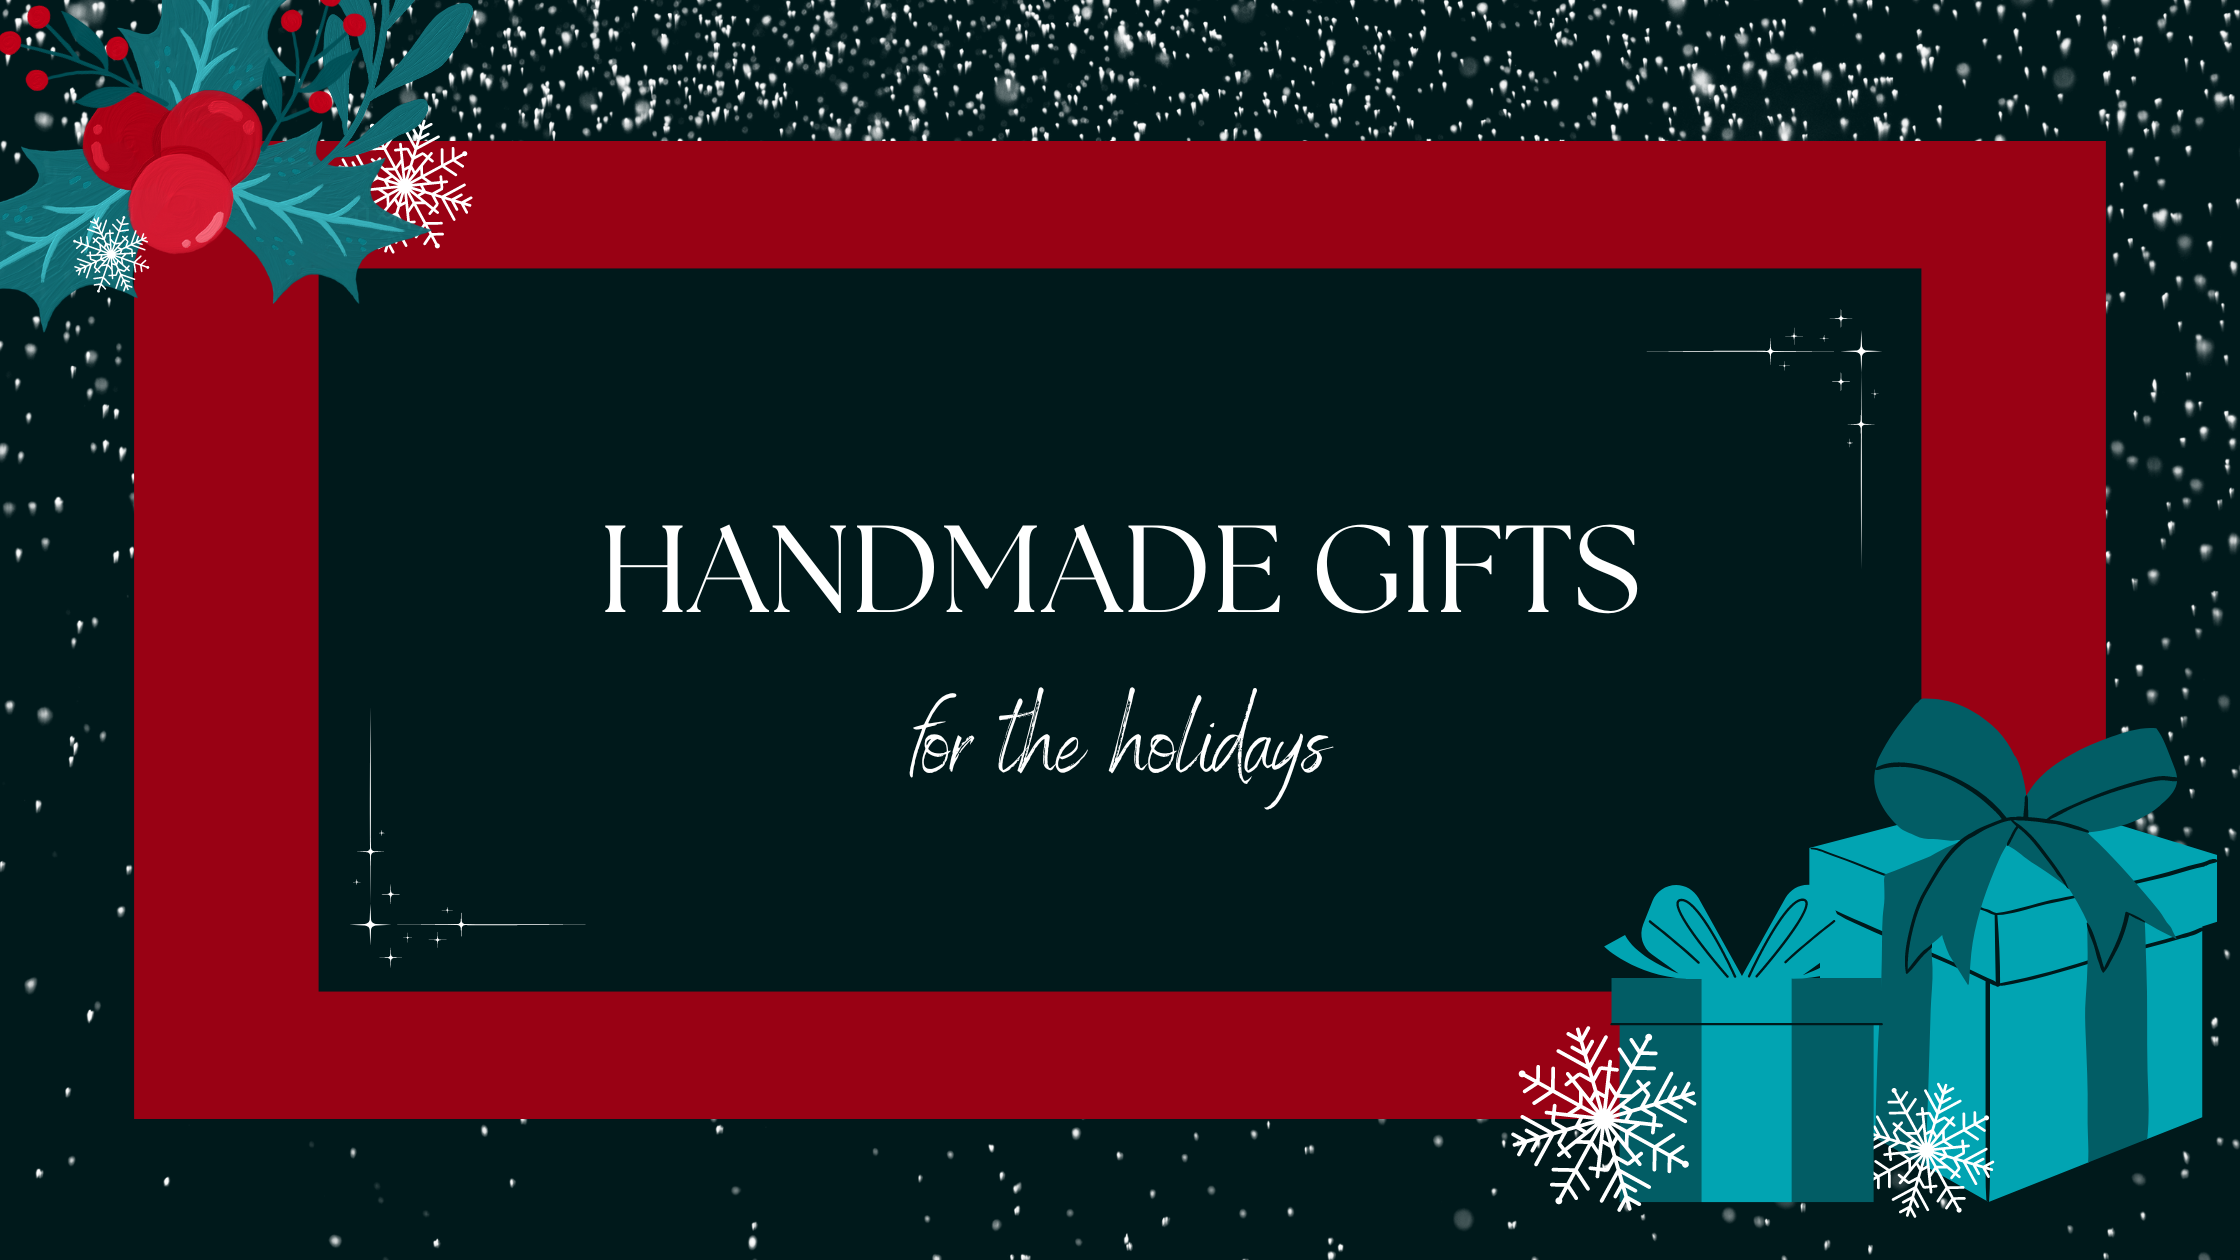 HANDMADE GIFTS FOR THE HOLIDAYS